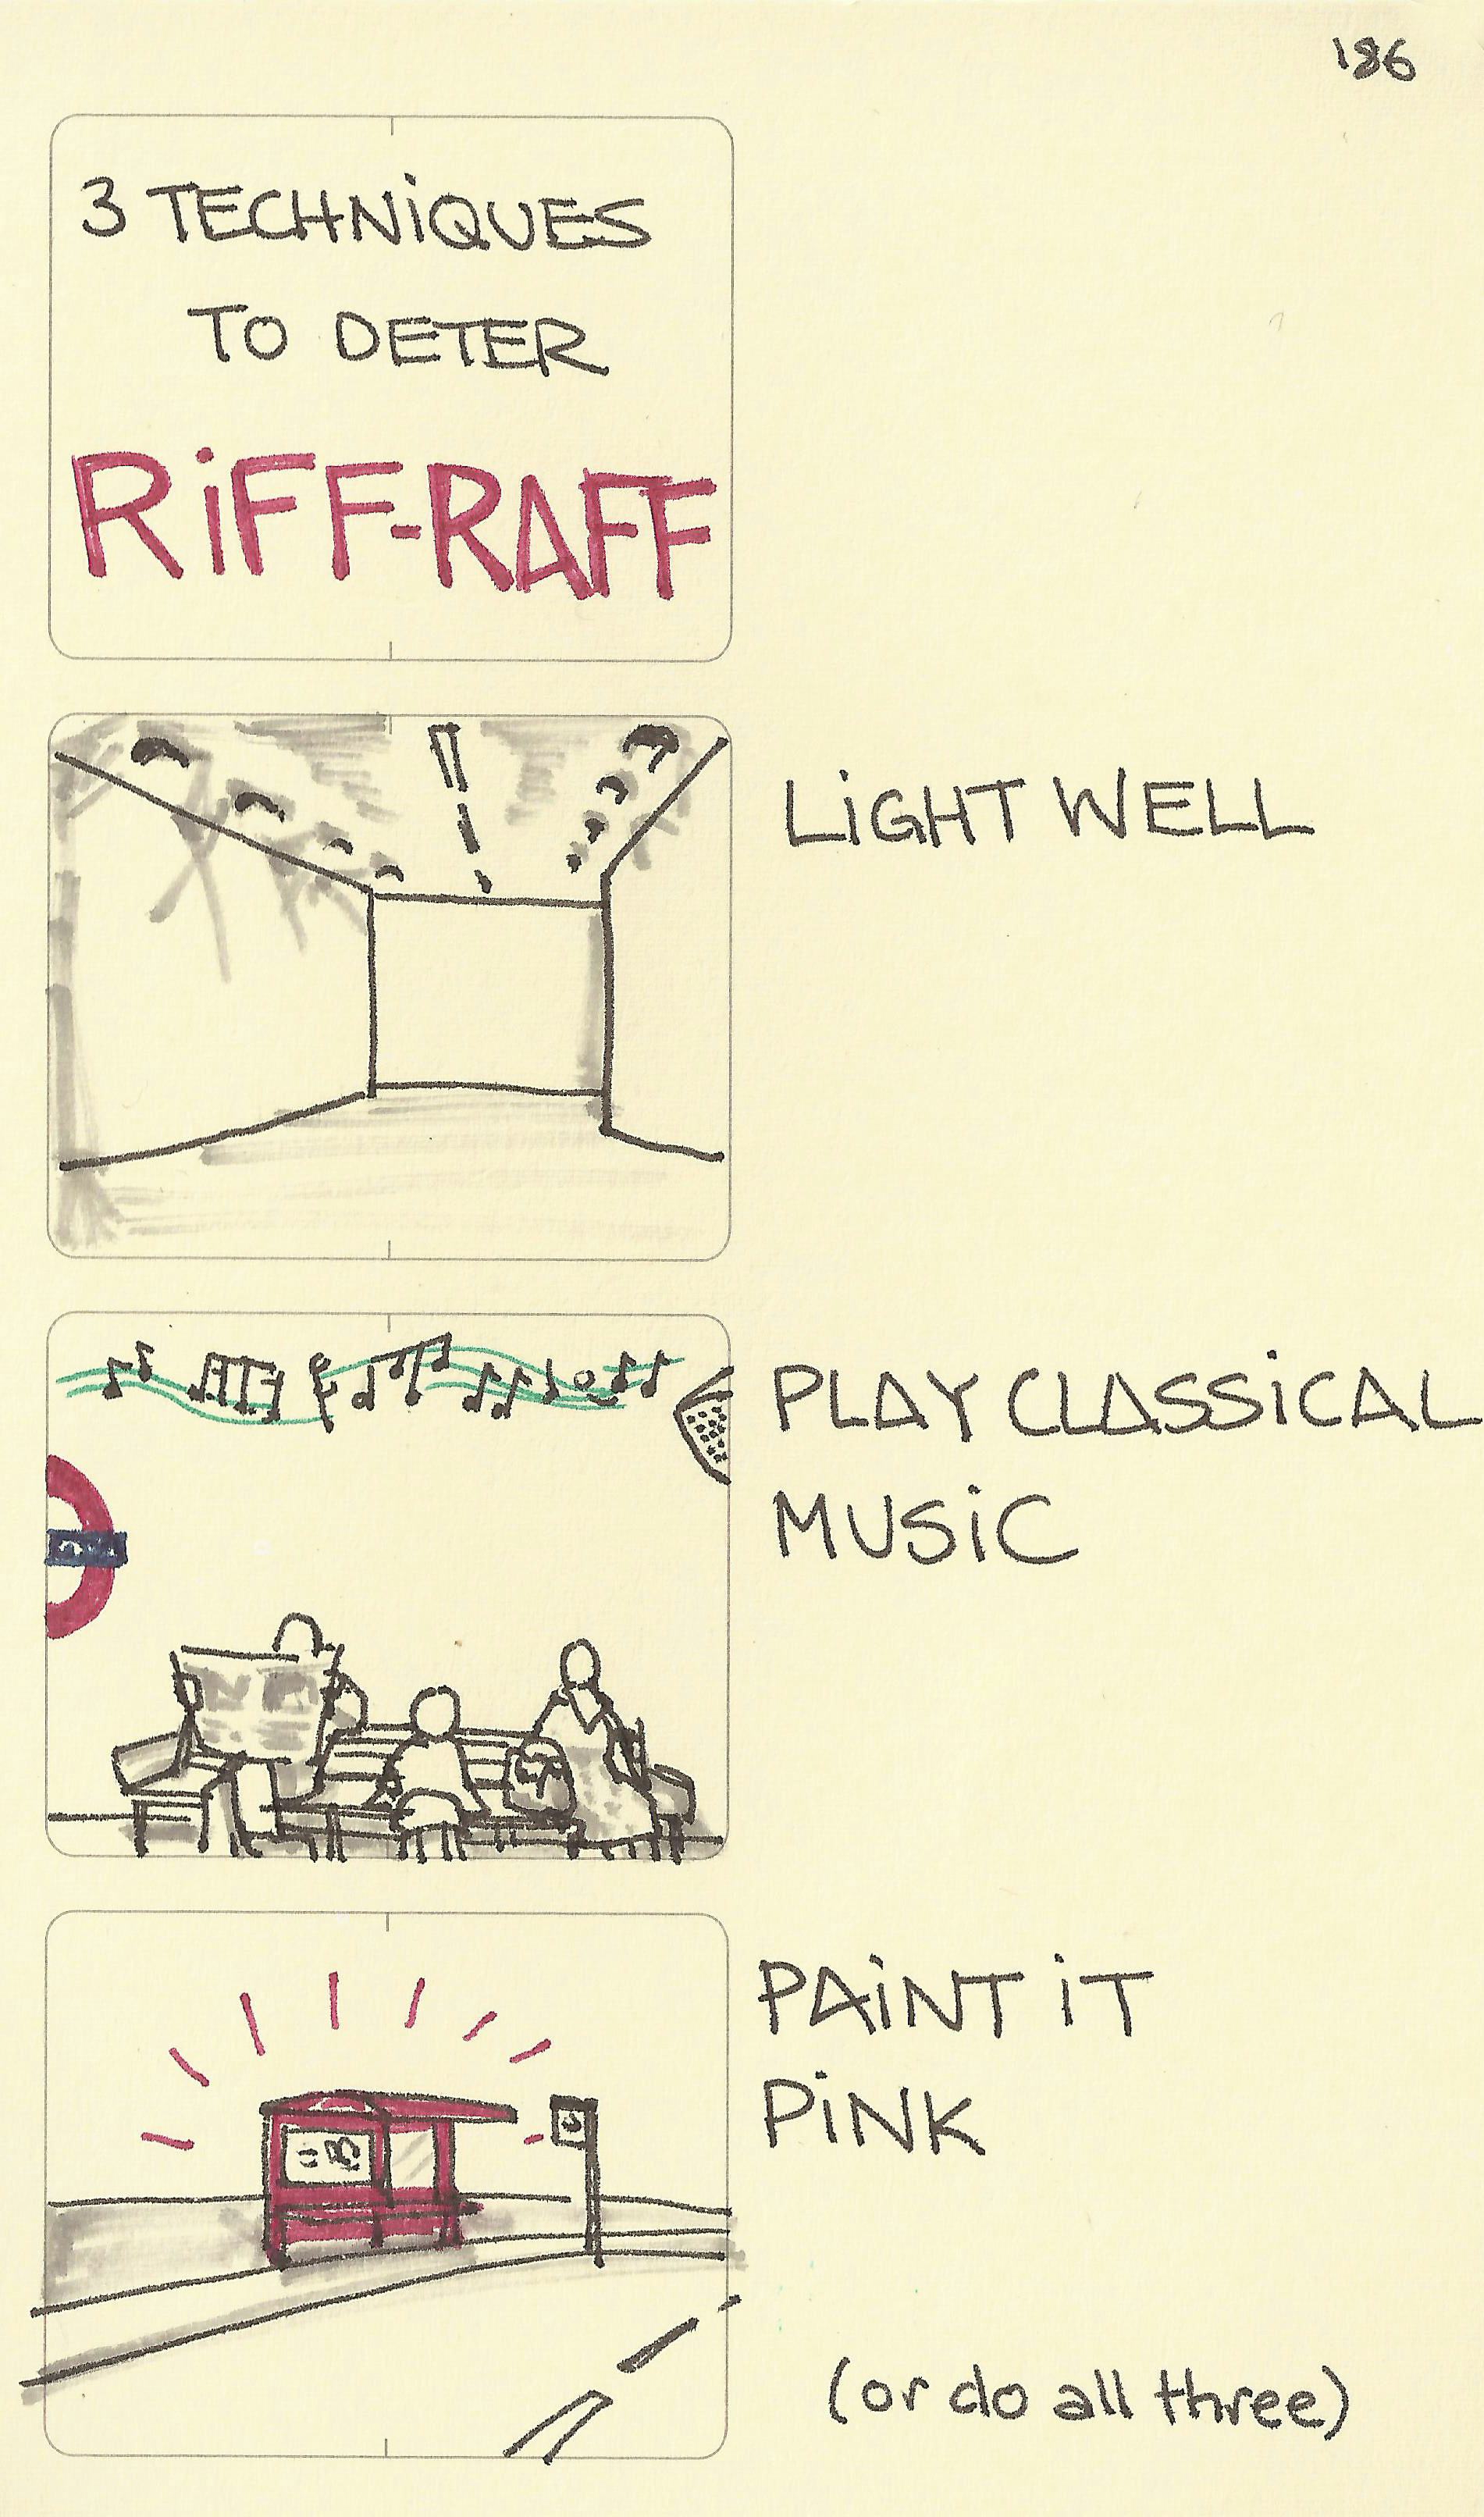 3 techniques to deter riff-raff - Sketchplanations